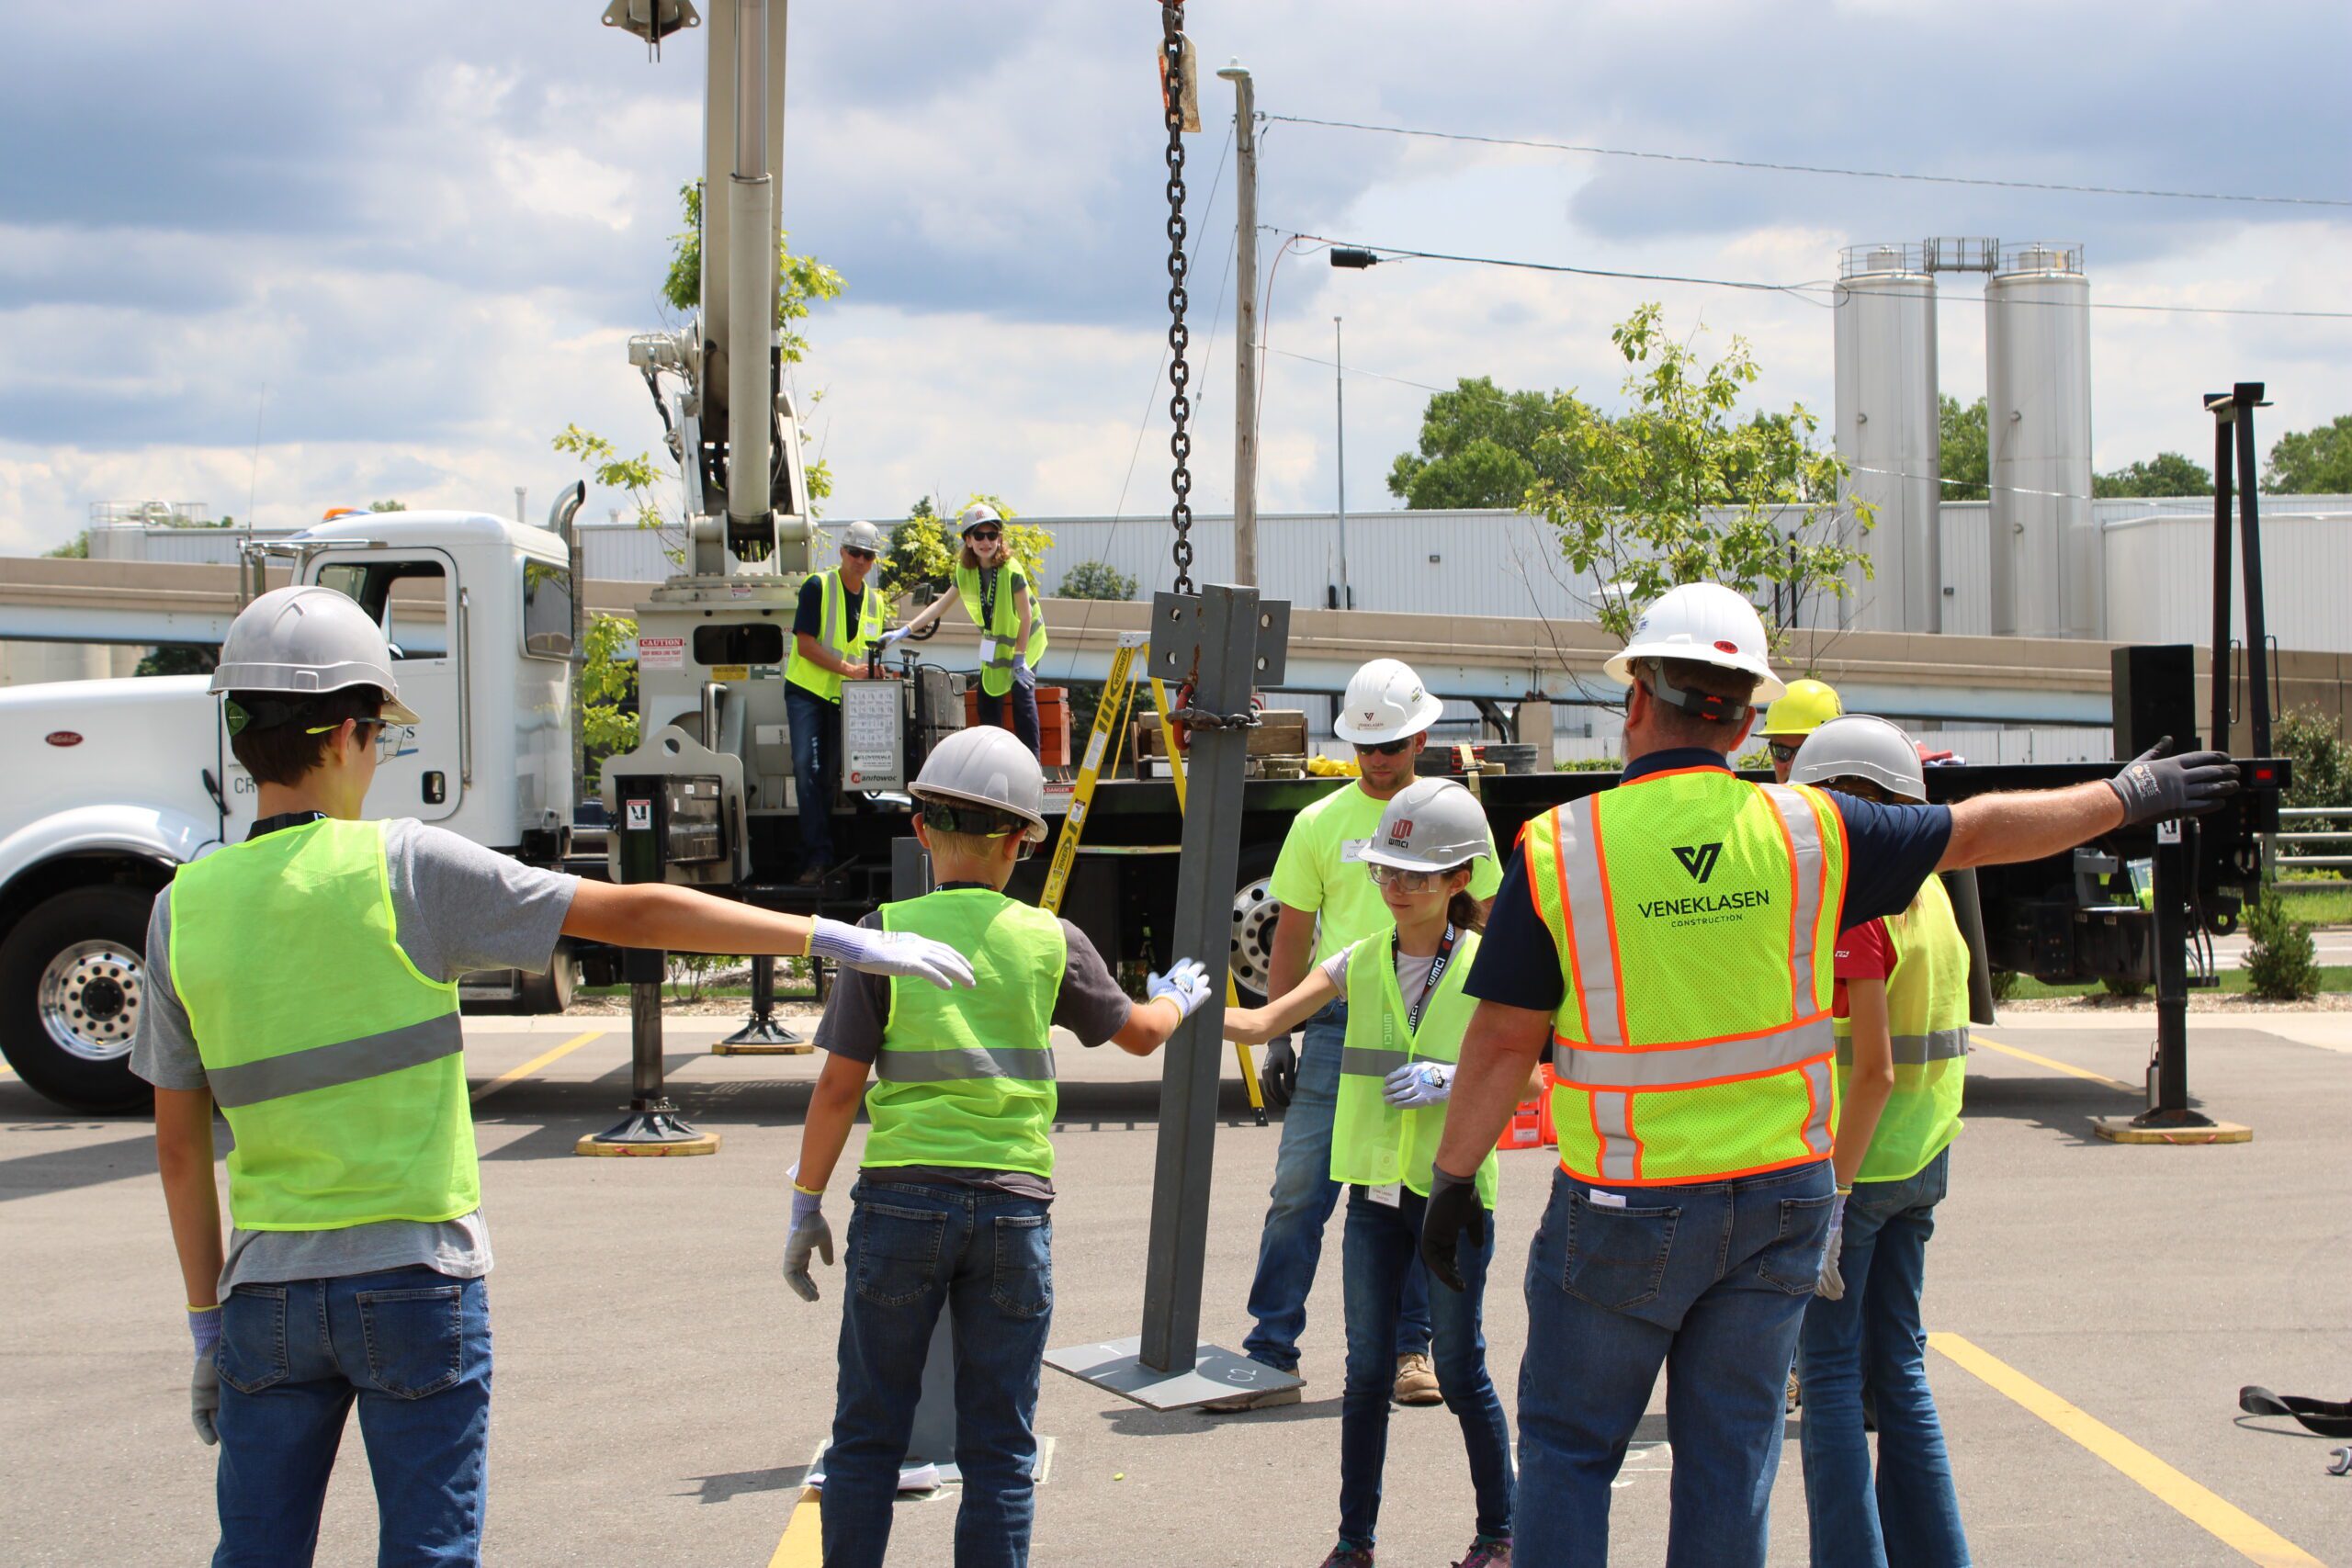 WMCI Middle School Construction Camp students get hands on experience with a crane and how steel buildings are erected.